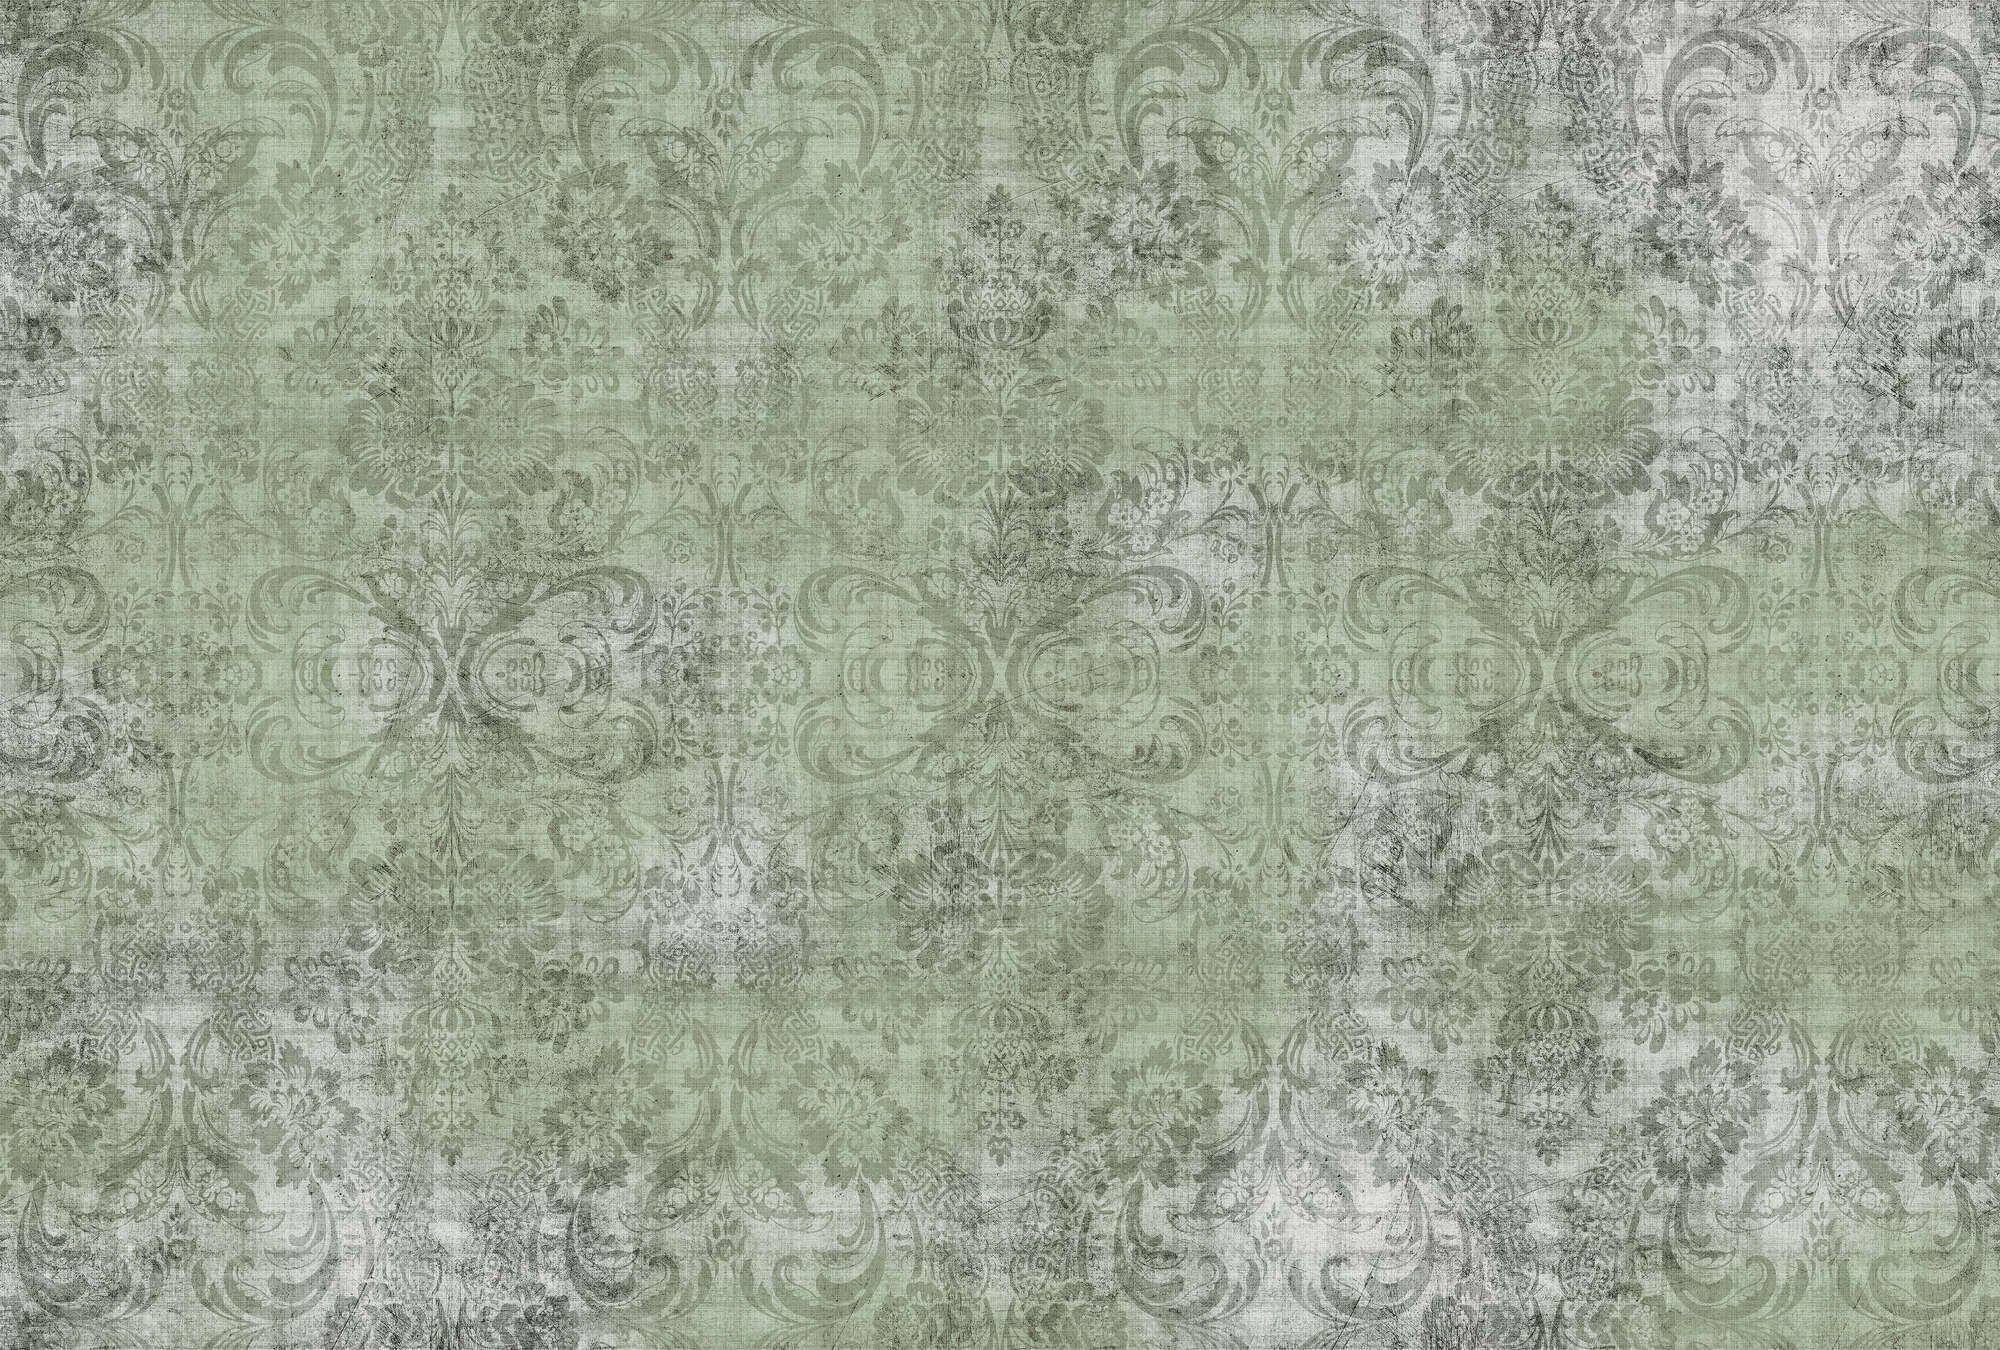             Old damask 2 - Ornaments on green-mottled photo wallpaper- Nature linen structure - Green | Pearl smooth fleece
        